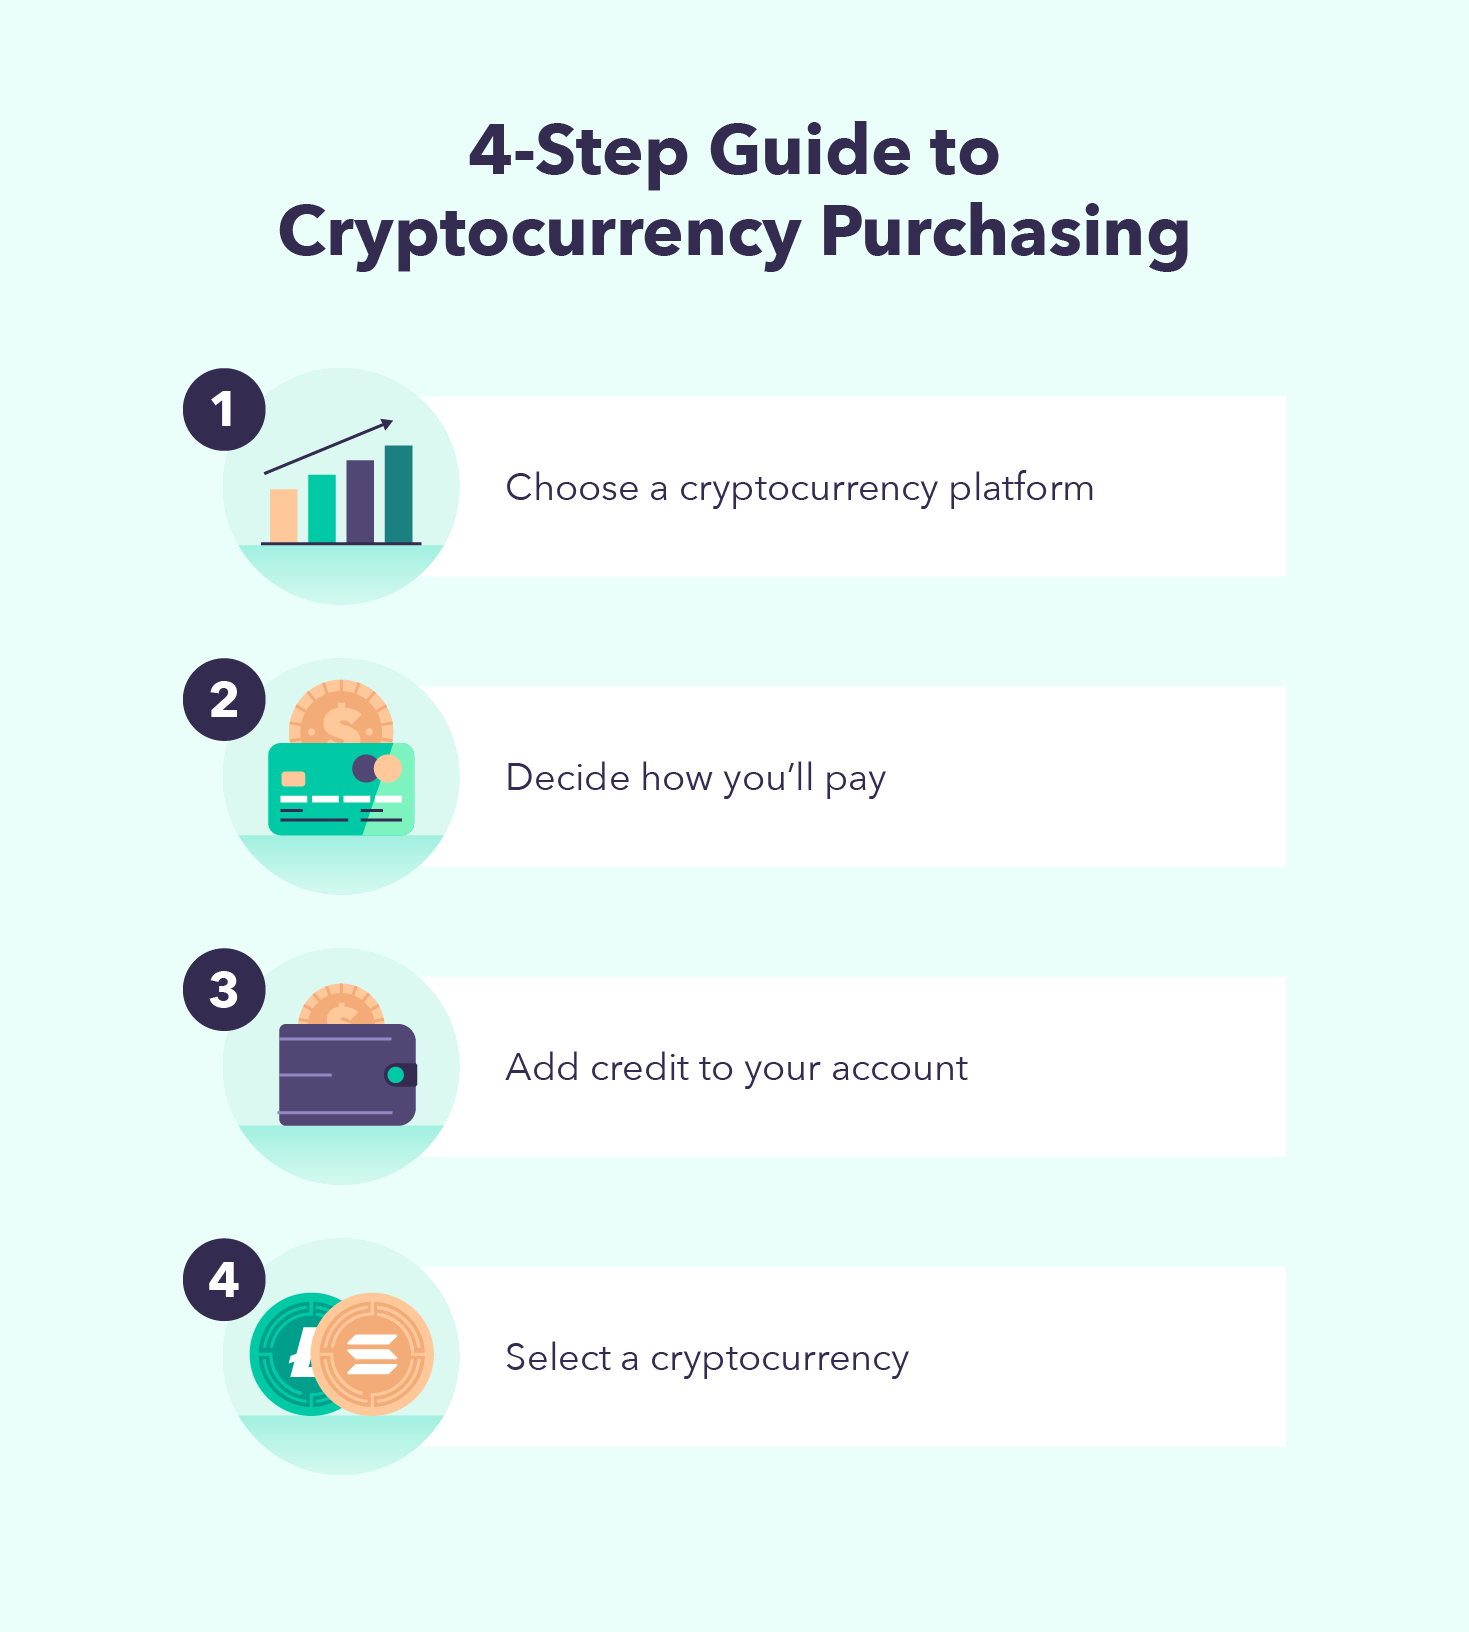 A graphic lists steps explaining how to purchase cryptocurrency safely, all in the name of answering the question “how does cryptocurrency work?”